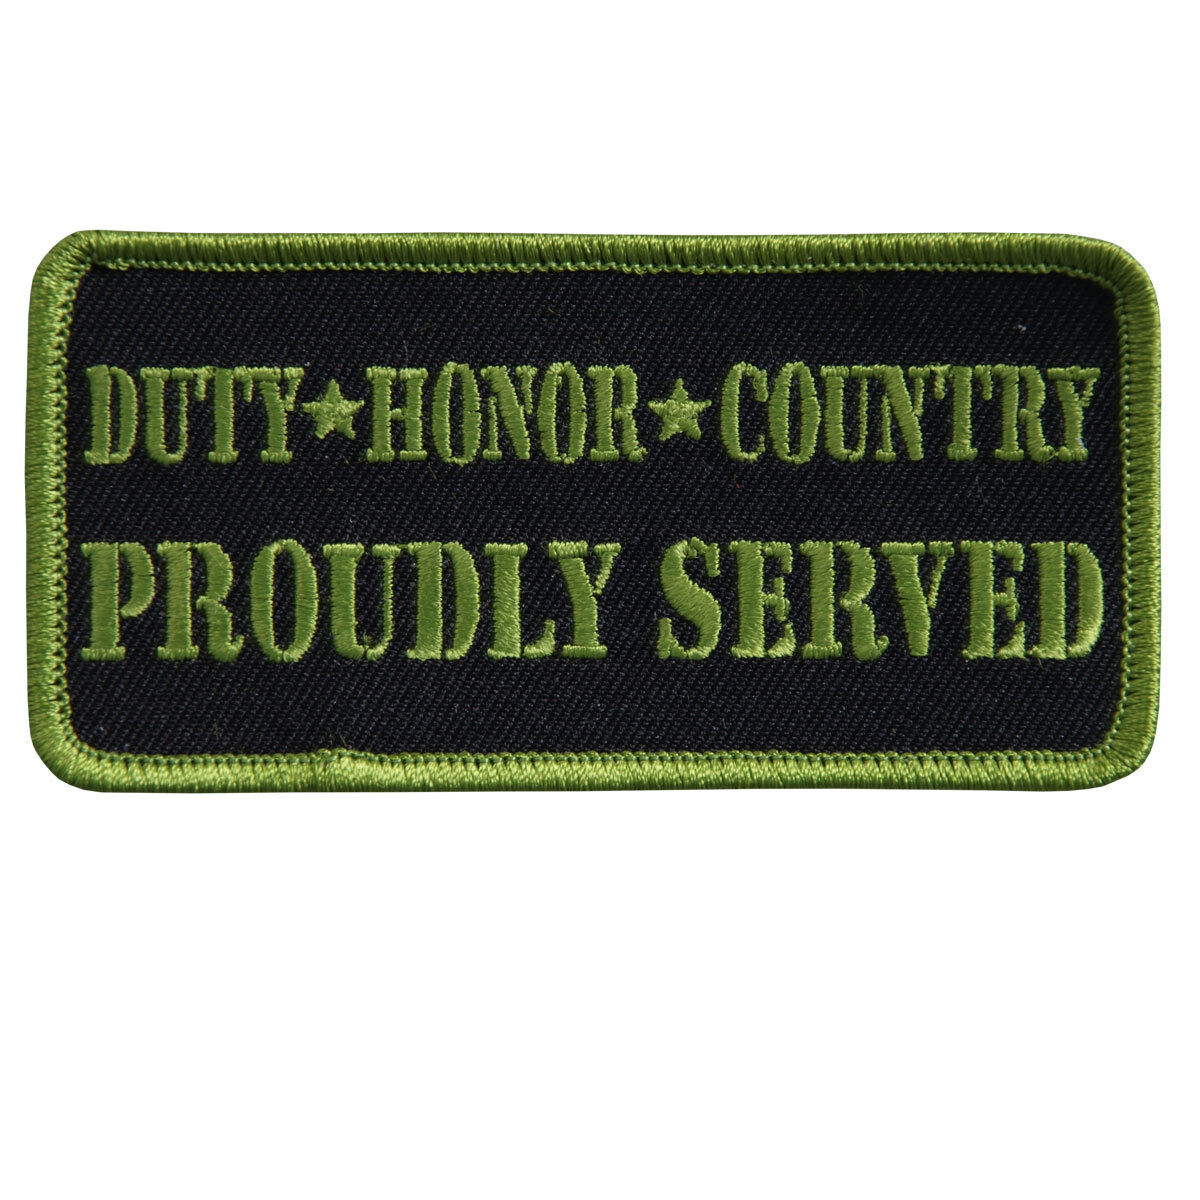 Duty, Honor, Country Proudly Served 4 INCH  pow mia MC BIKER PATCH